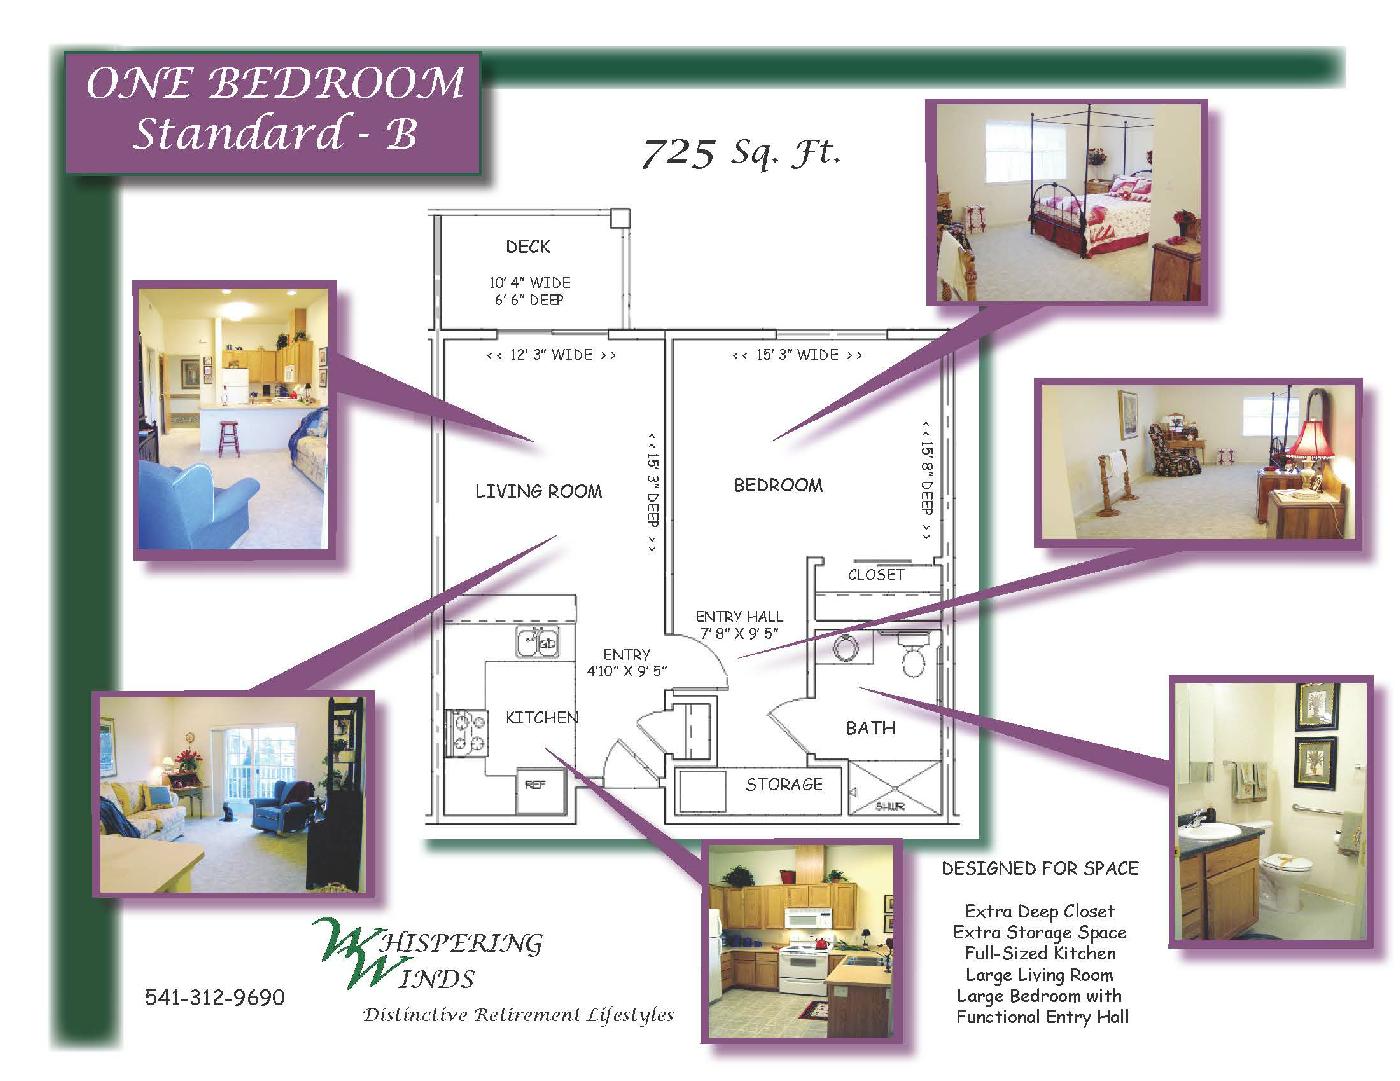 Layout Example - One Bedroom Standard - B